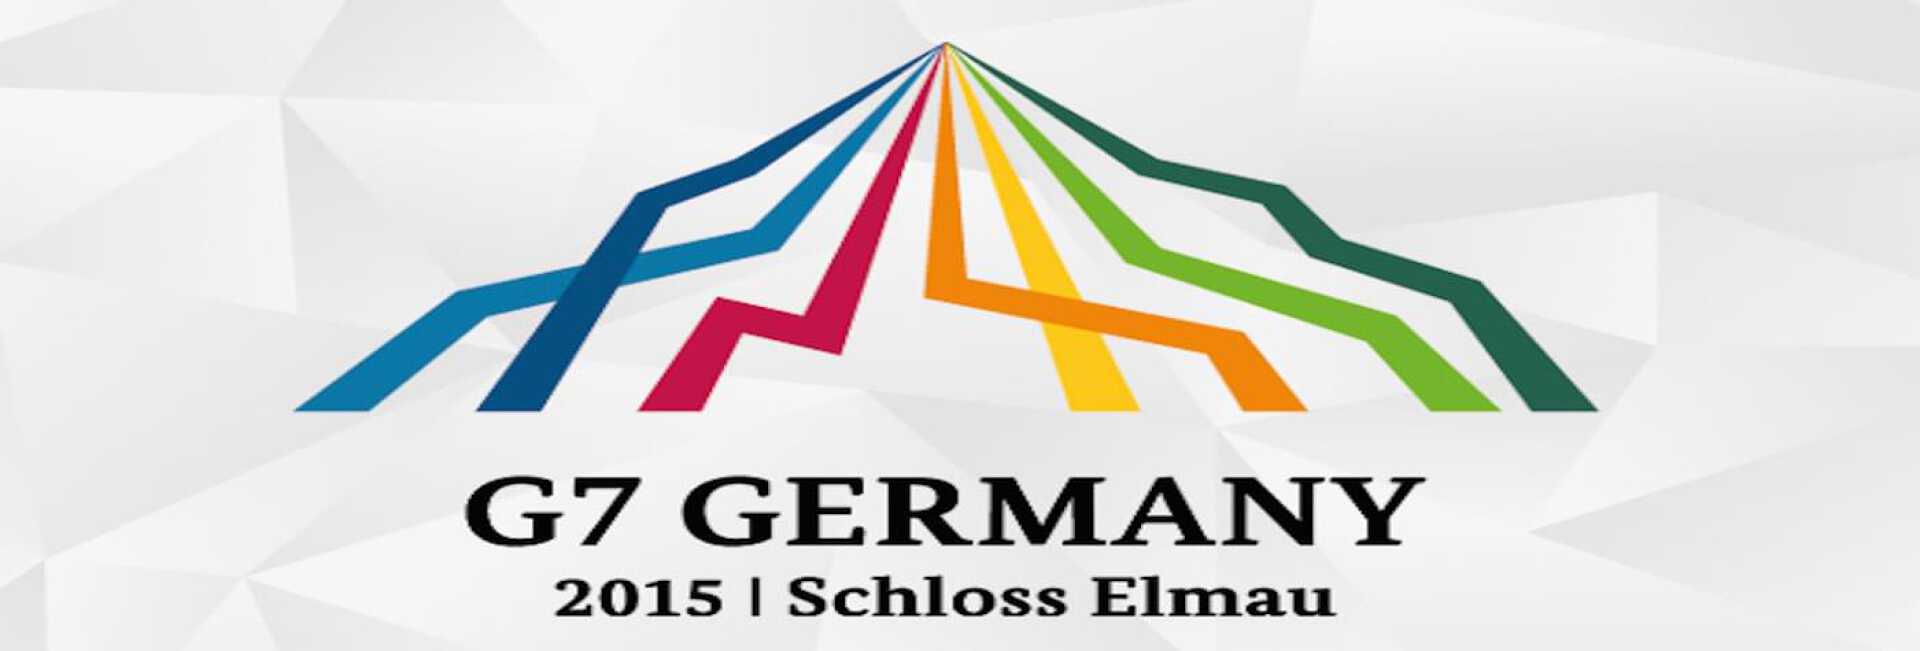 Banner of the G7 happening at Schloss Elmau in Germany in 2015